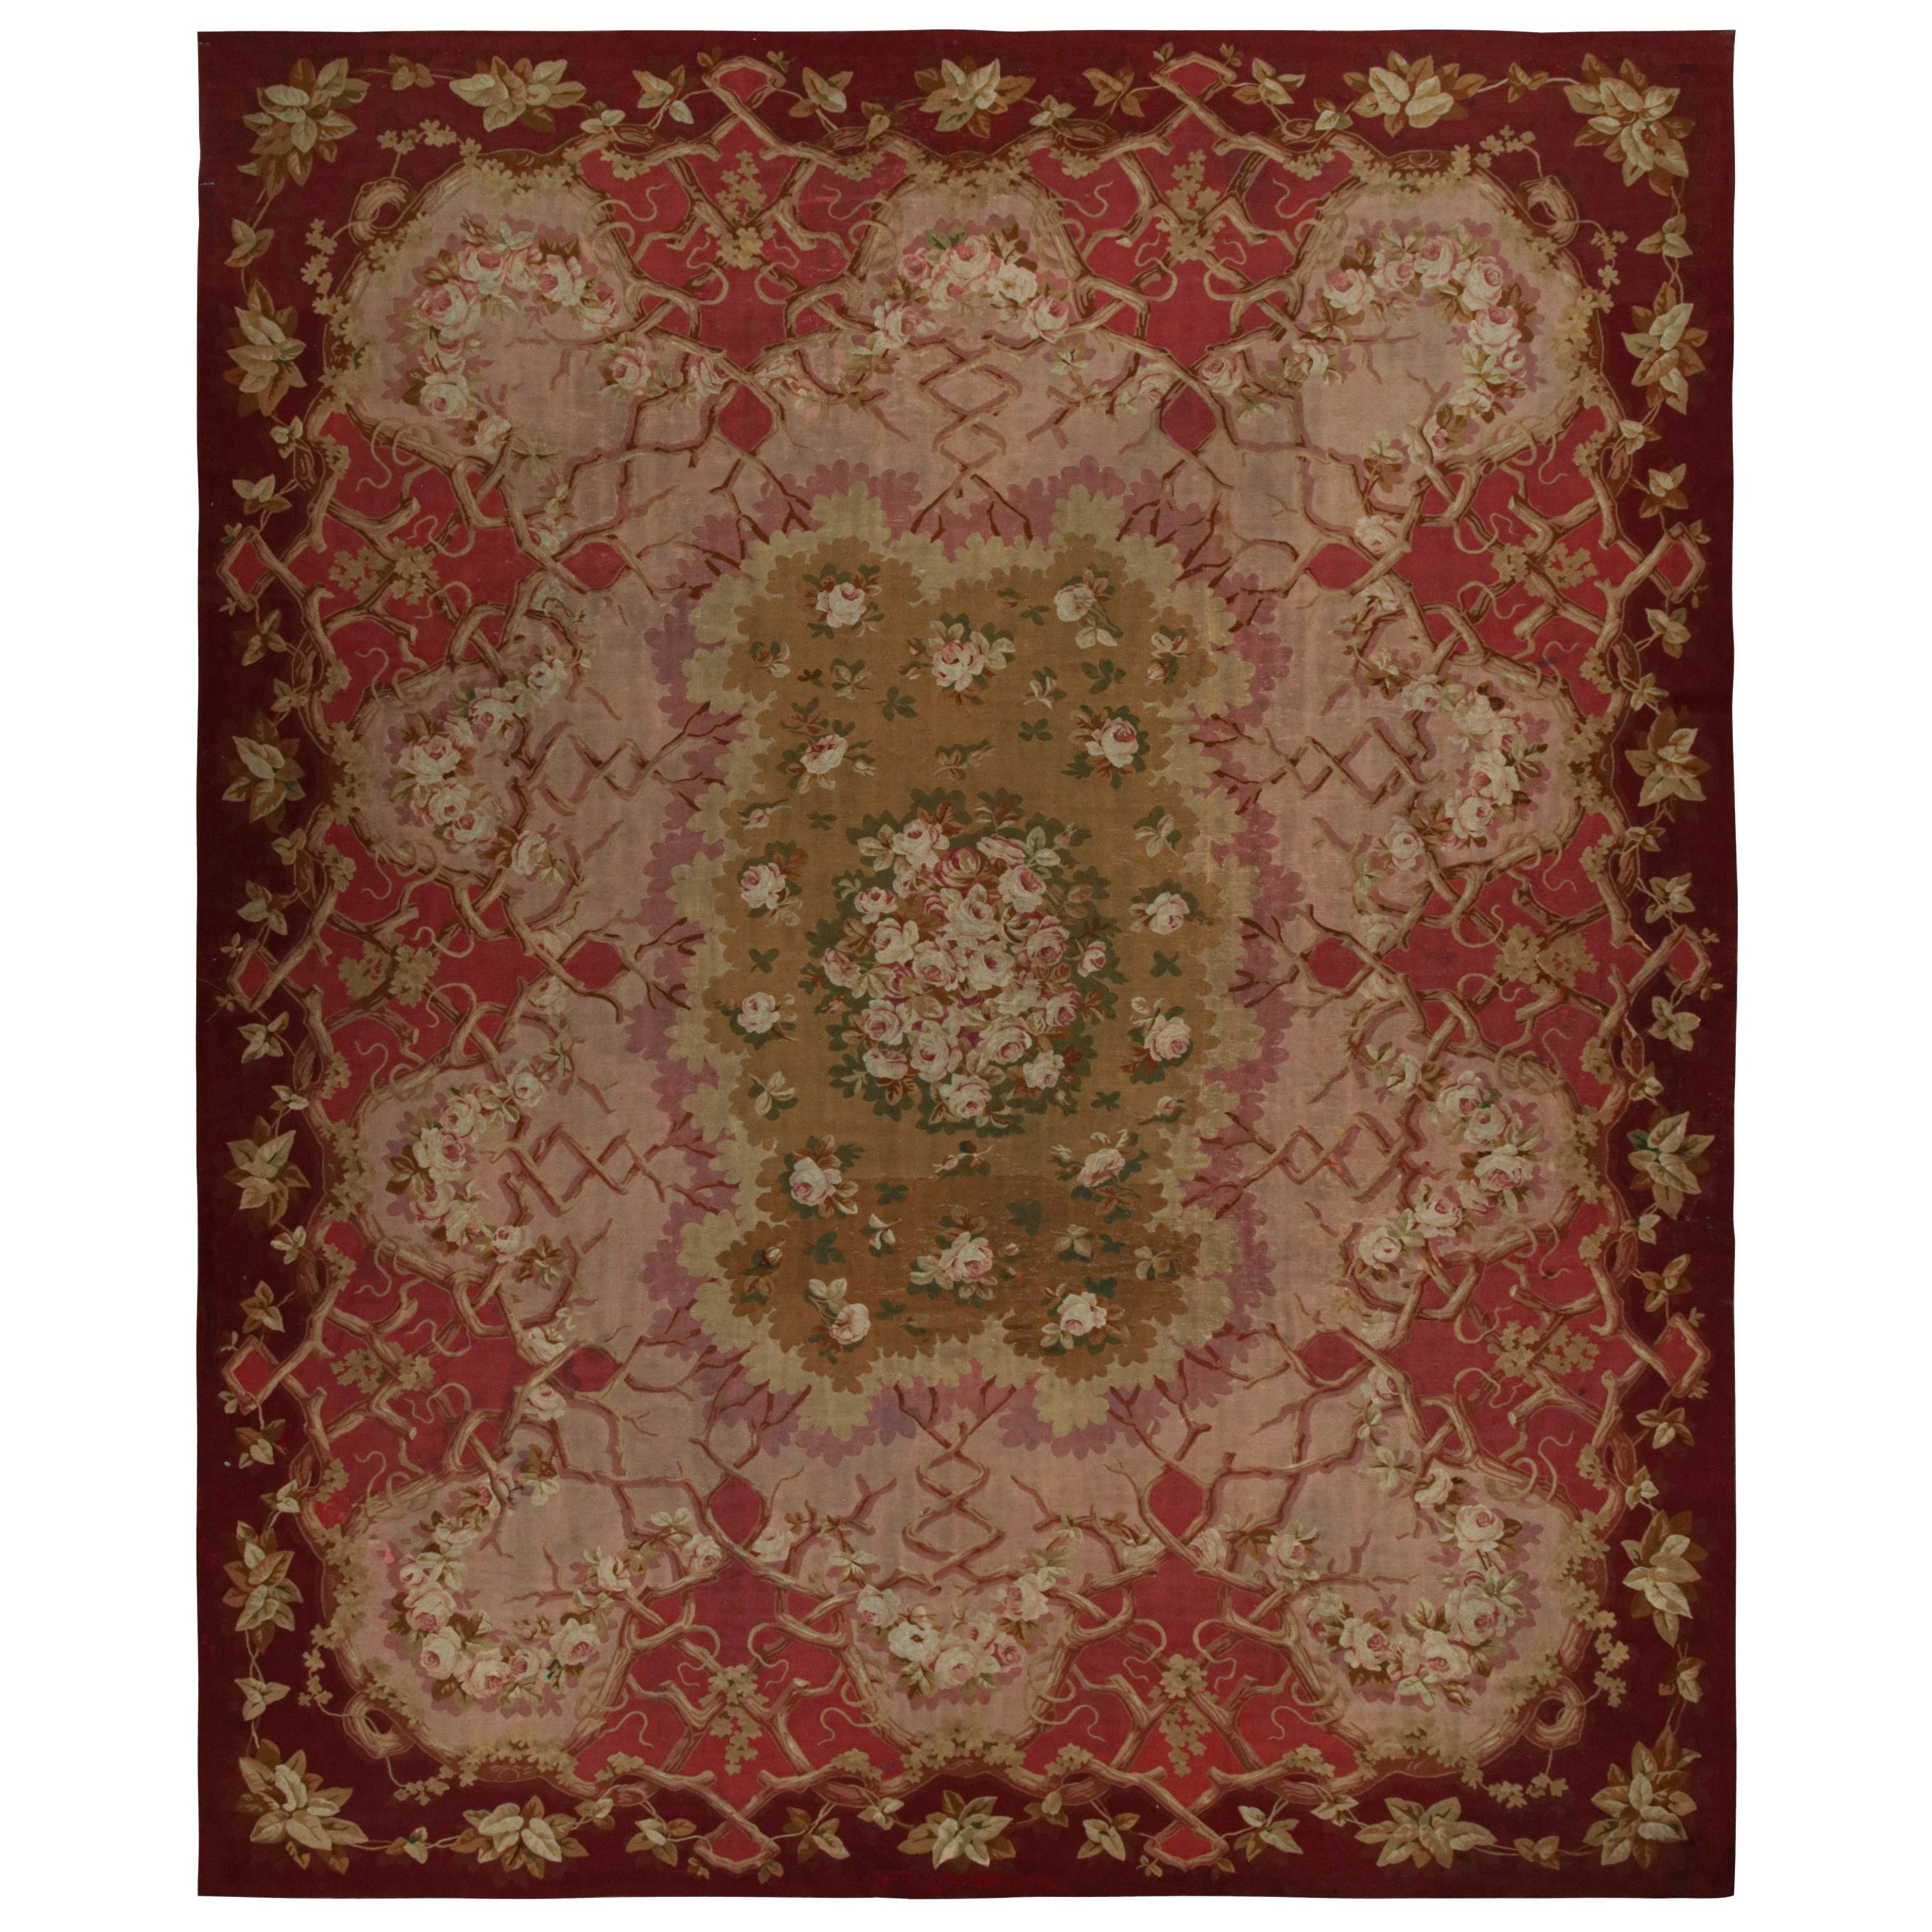 Antique Aubusson Flatweave Rug in Red with Floral Patterns For Sale